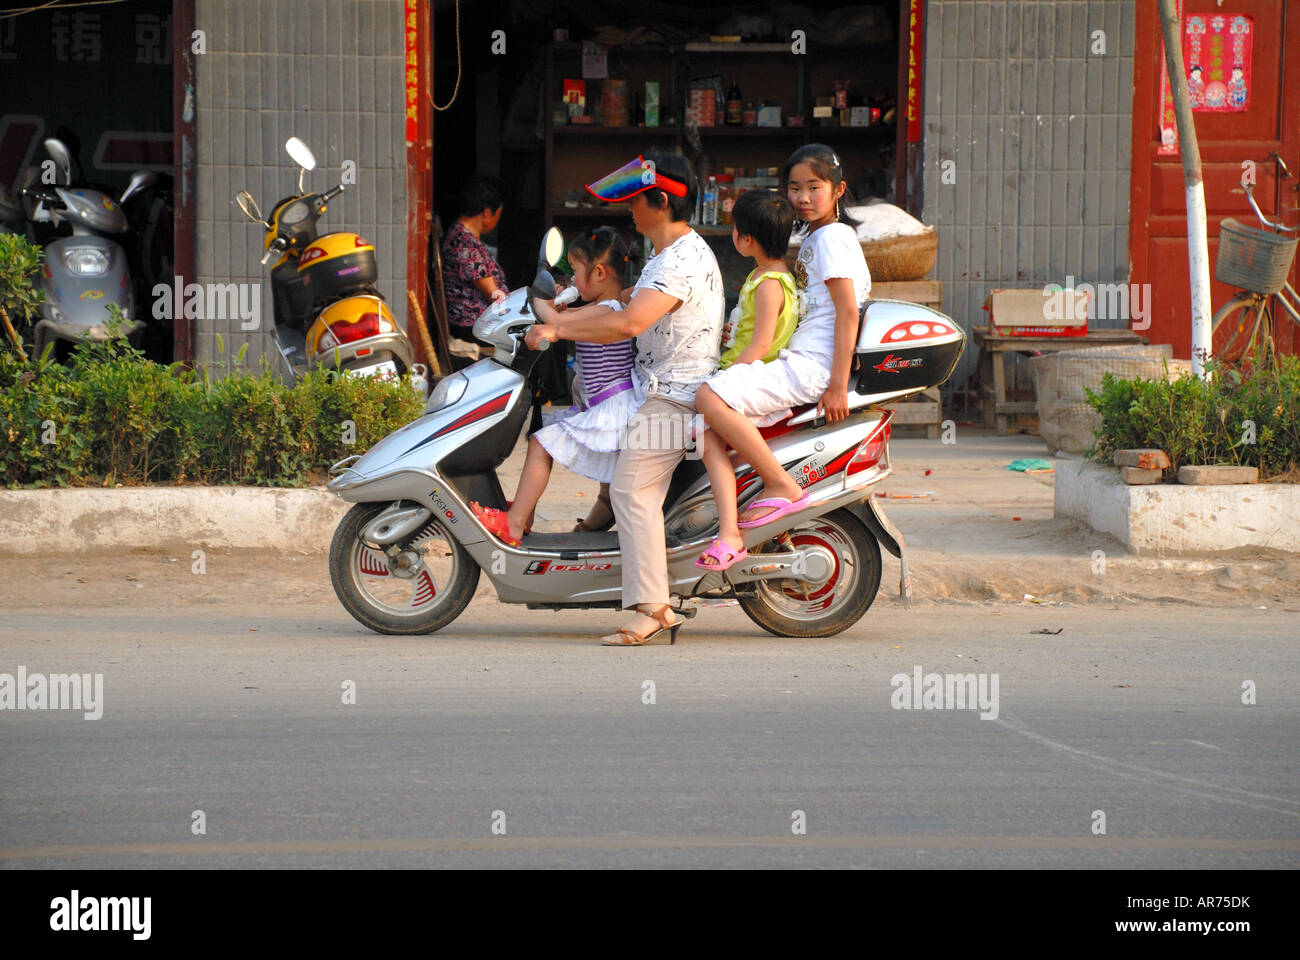 Four people on a scooter on road by Taiqing Palace Square Kaifeng Henan Province China Asia Stock Photo